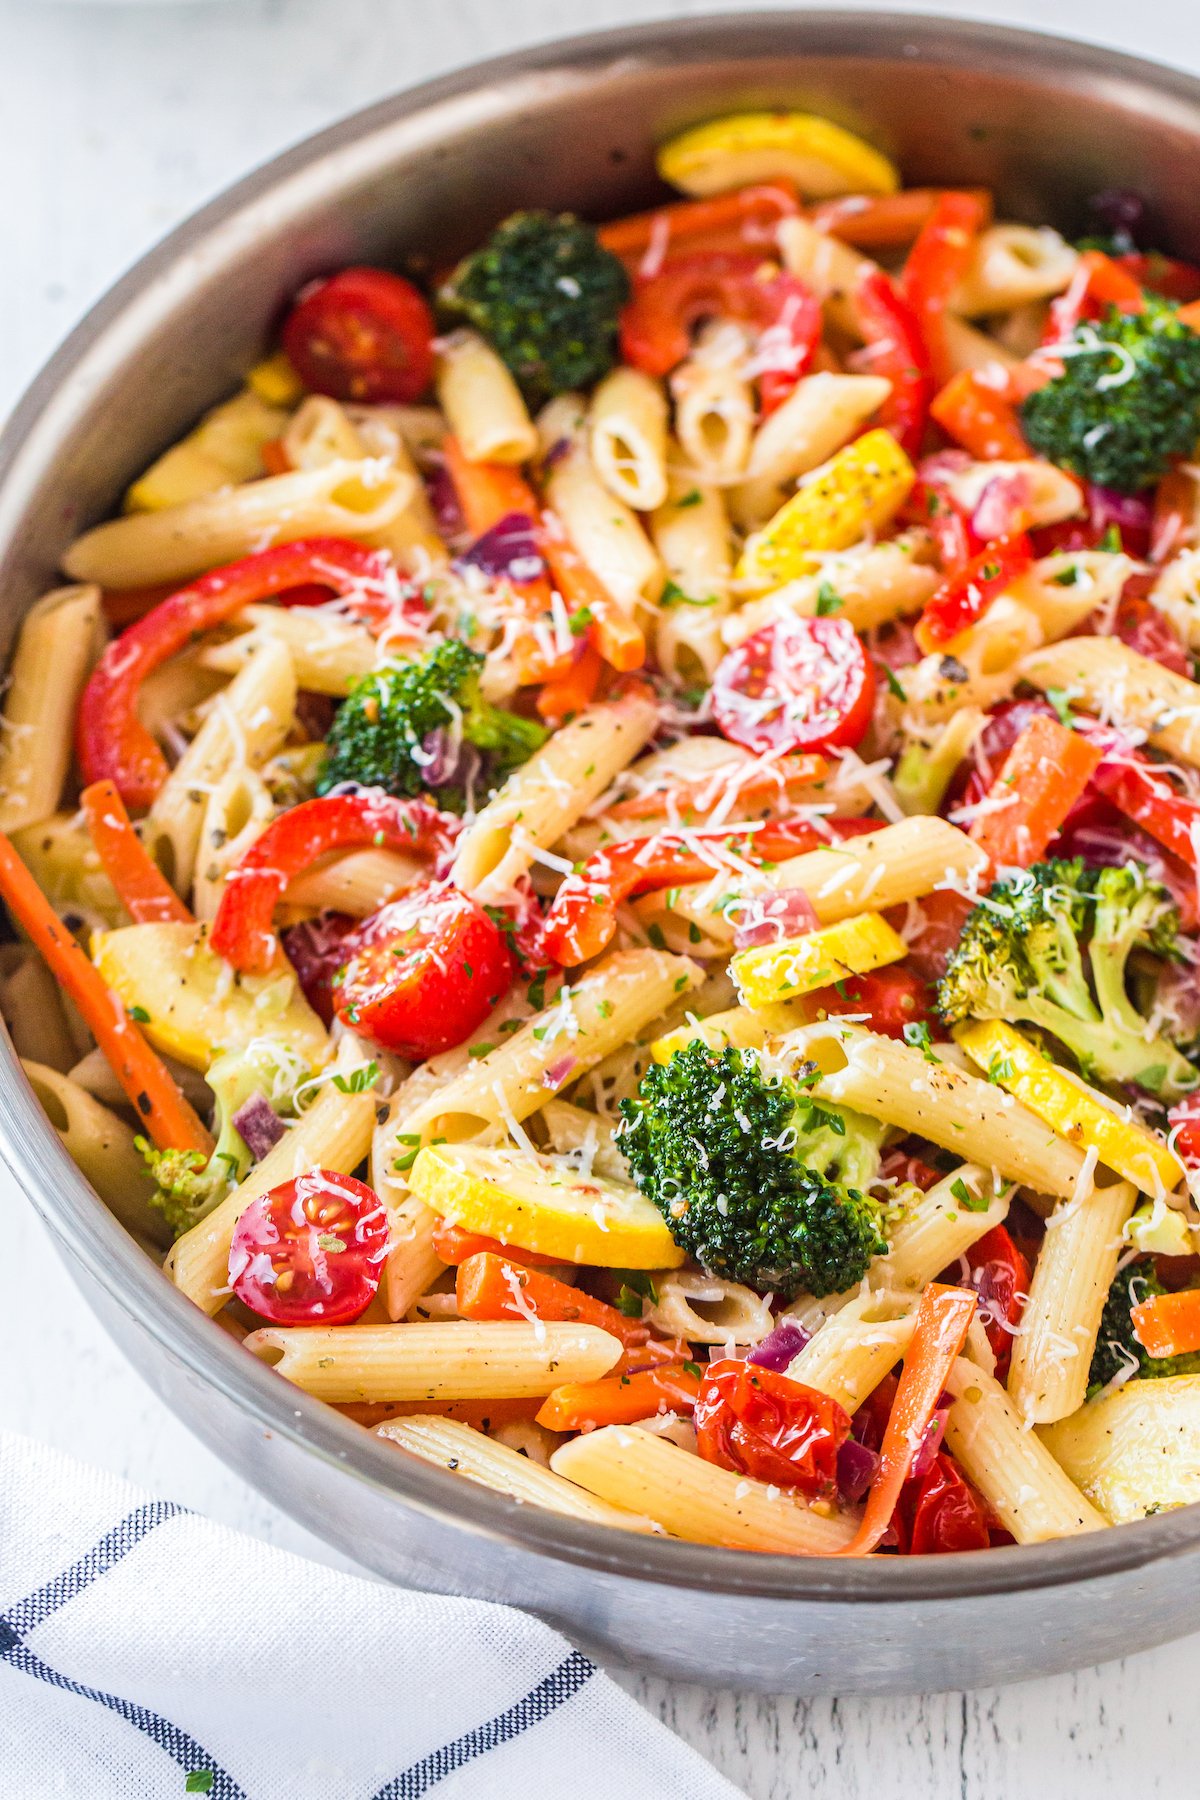 Pot of pasta and vegetables.